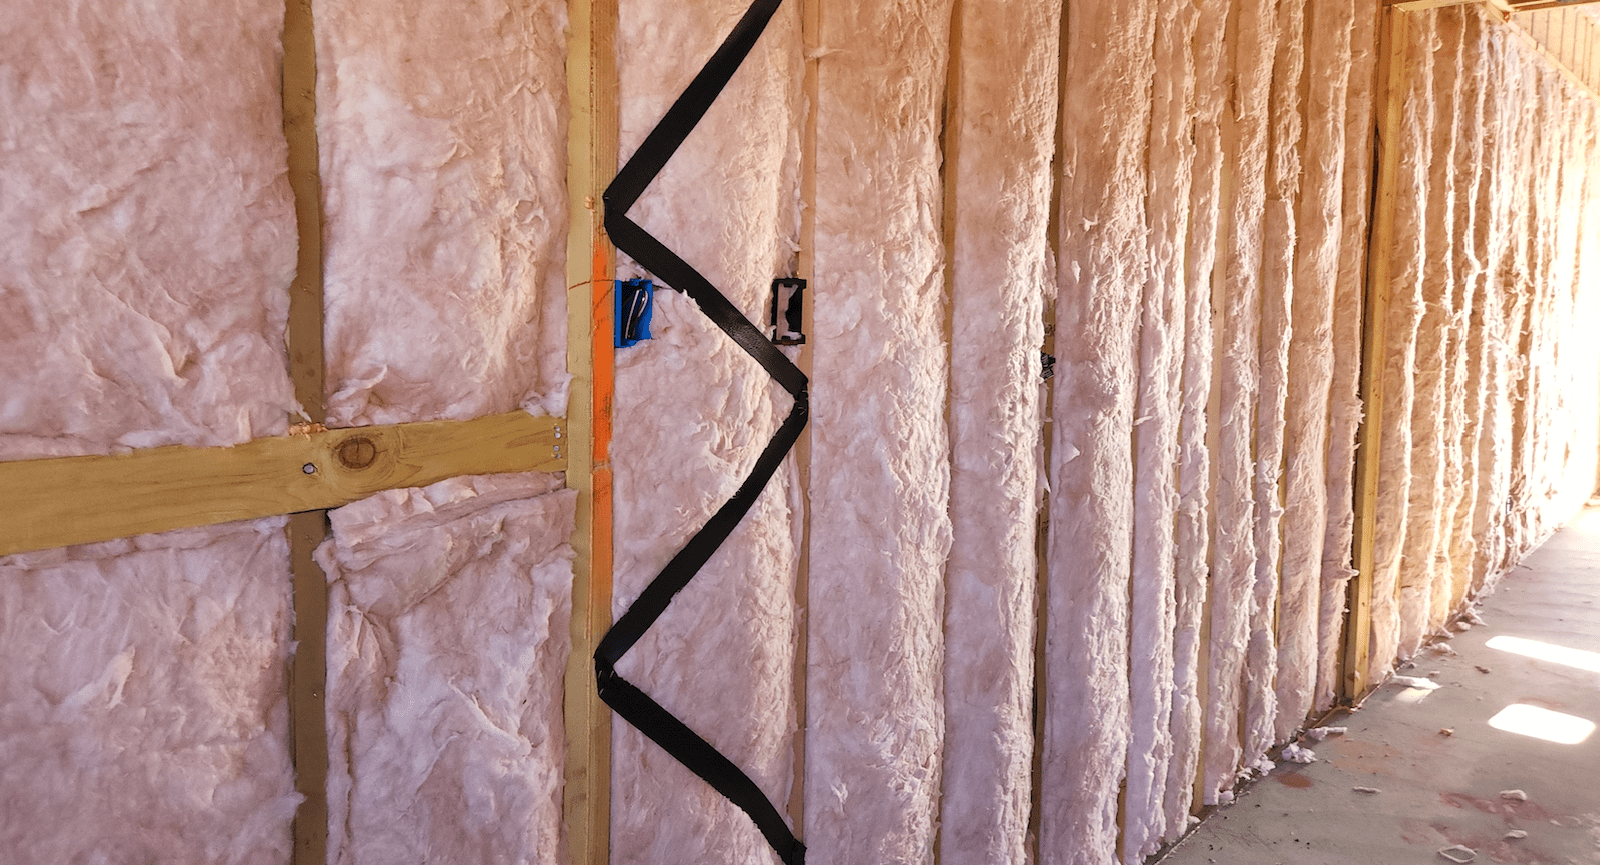 Maintaining construction quality during supply chain disruptions may mean switching to a different type of insulation